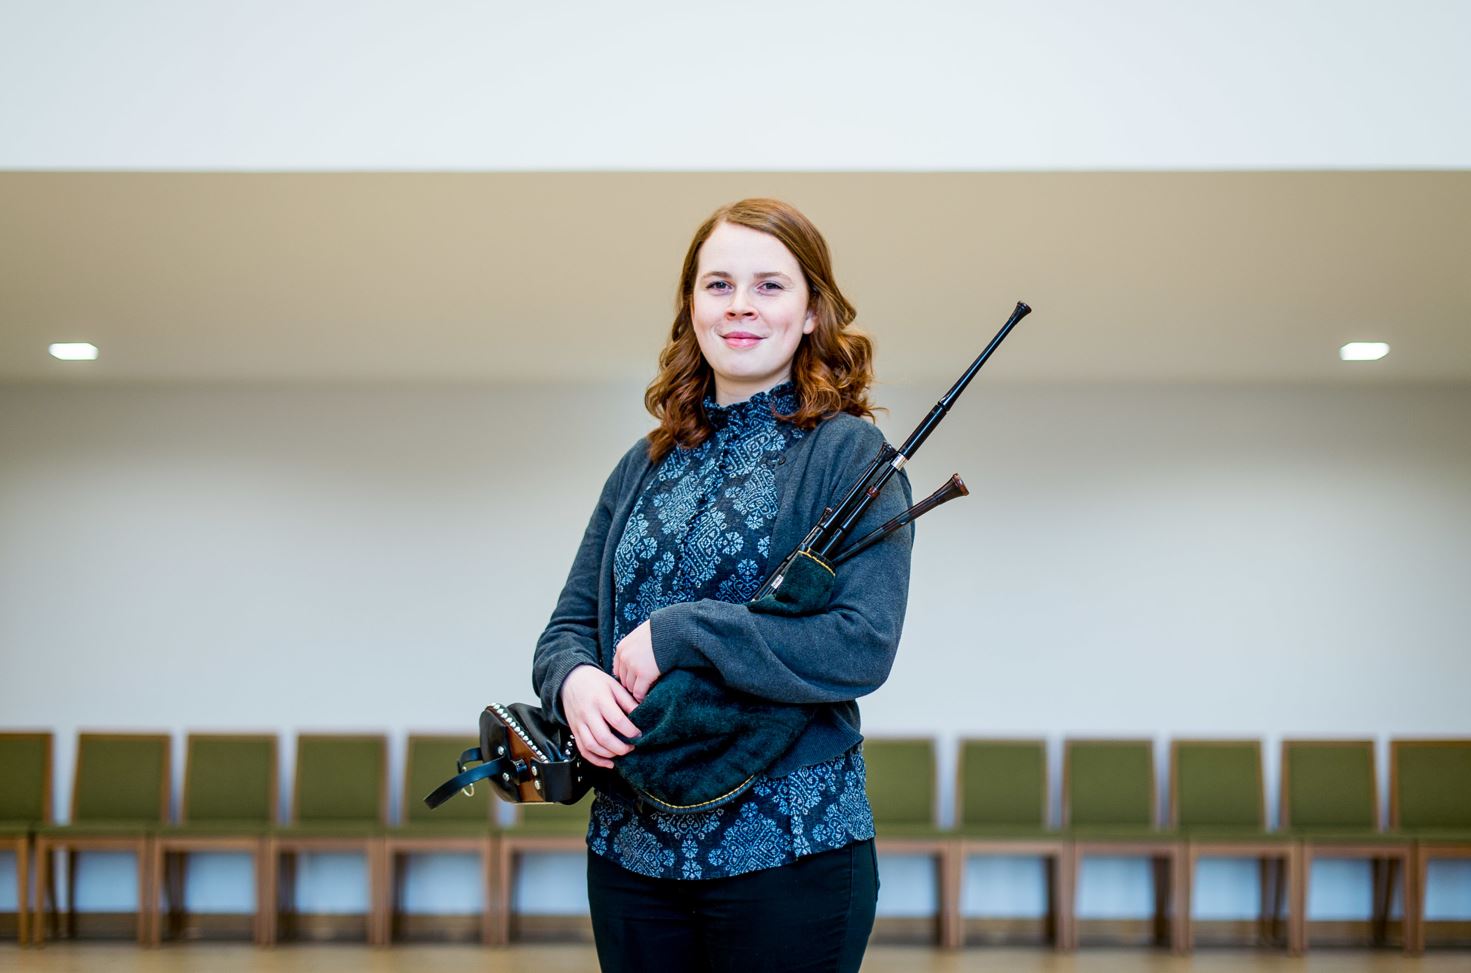 UHI music students to showcase their skills at Piping Live 